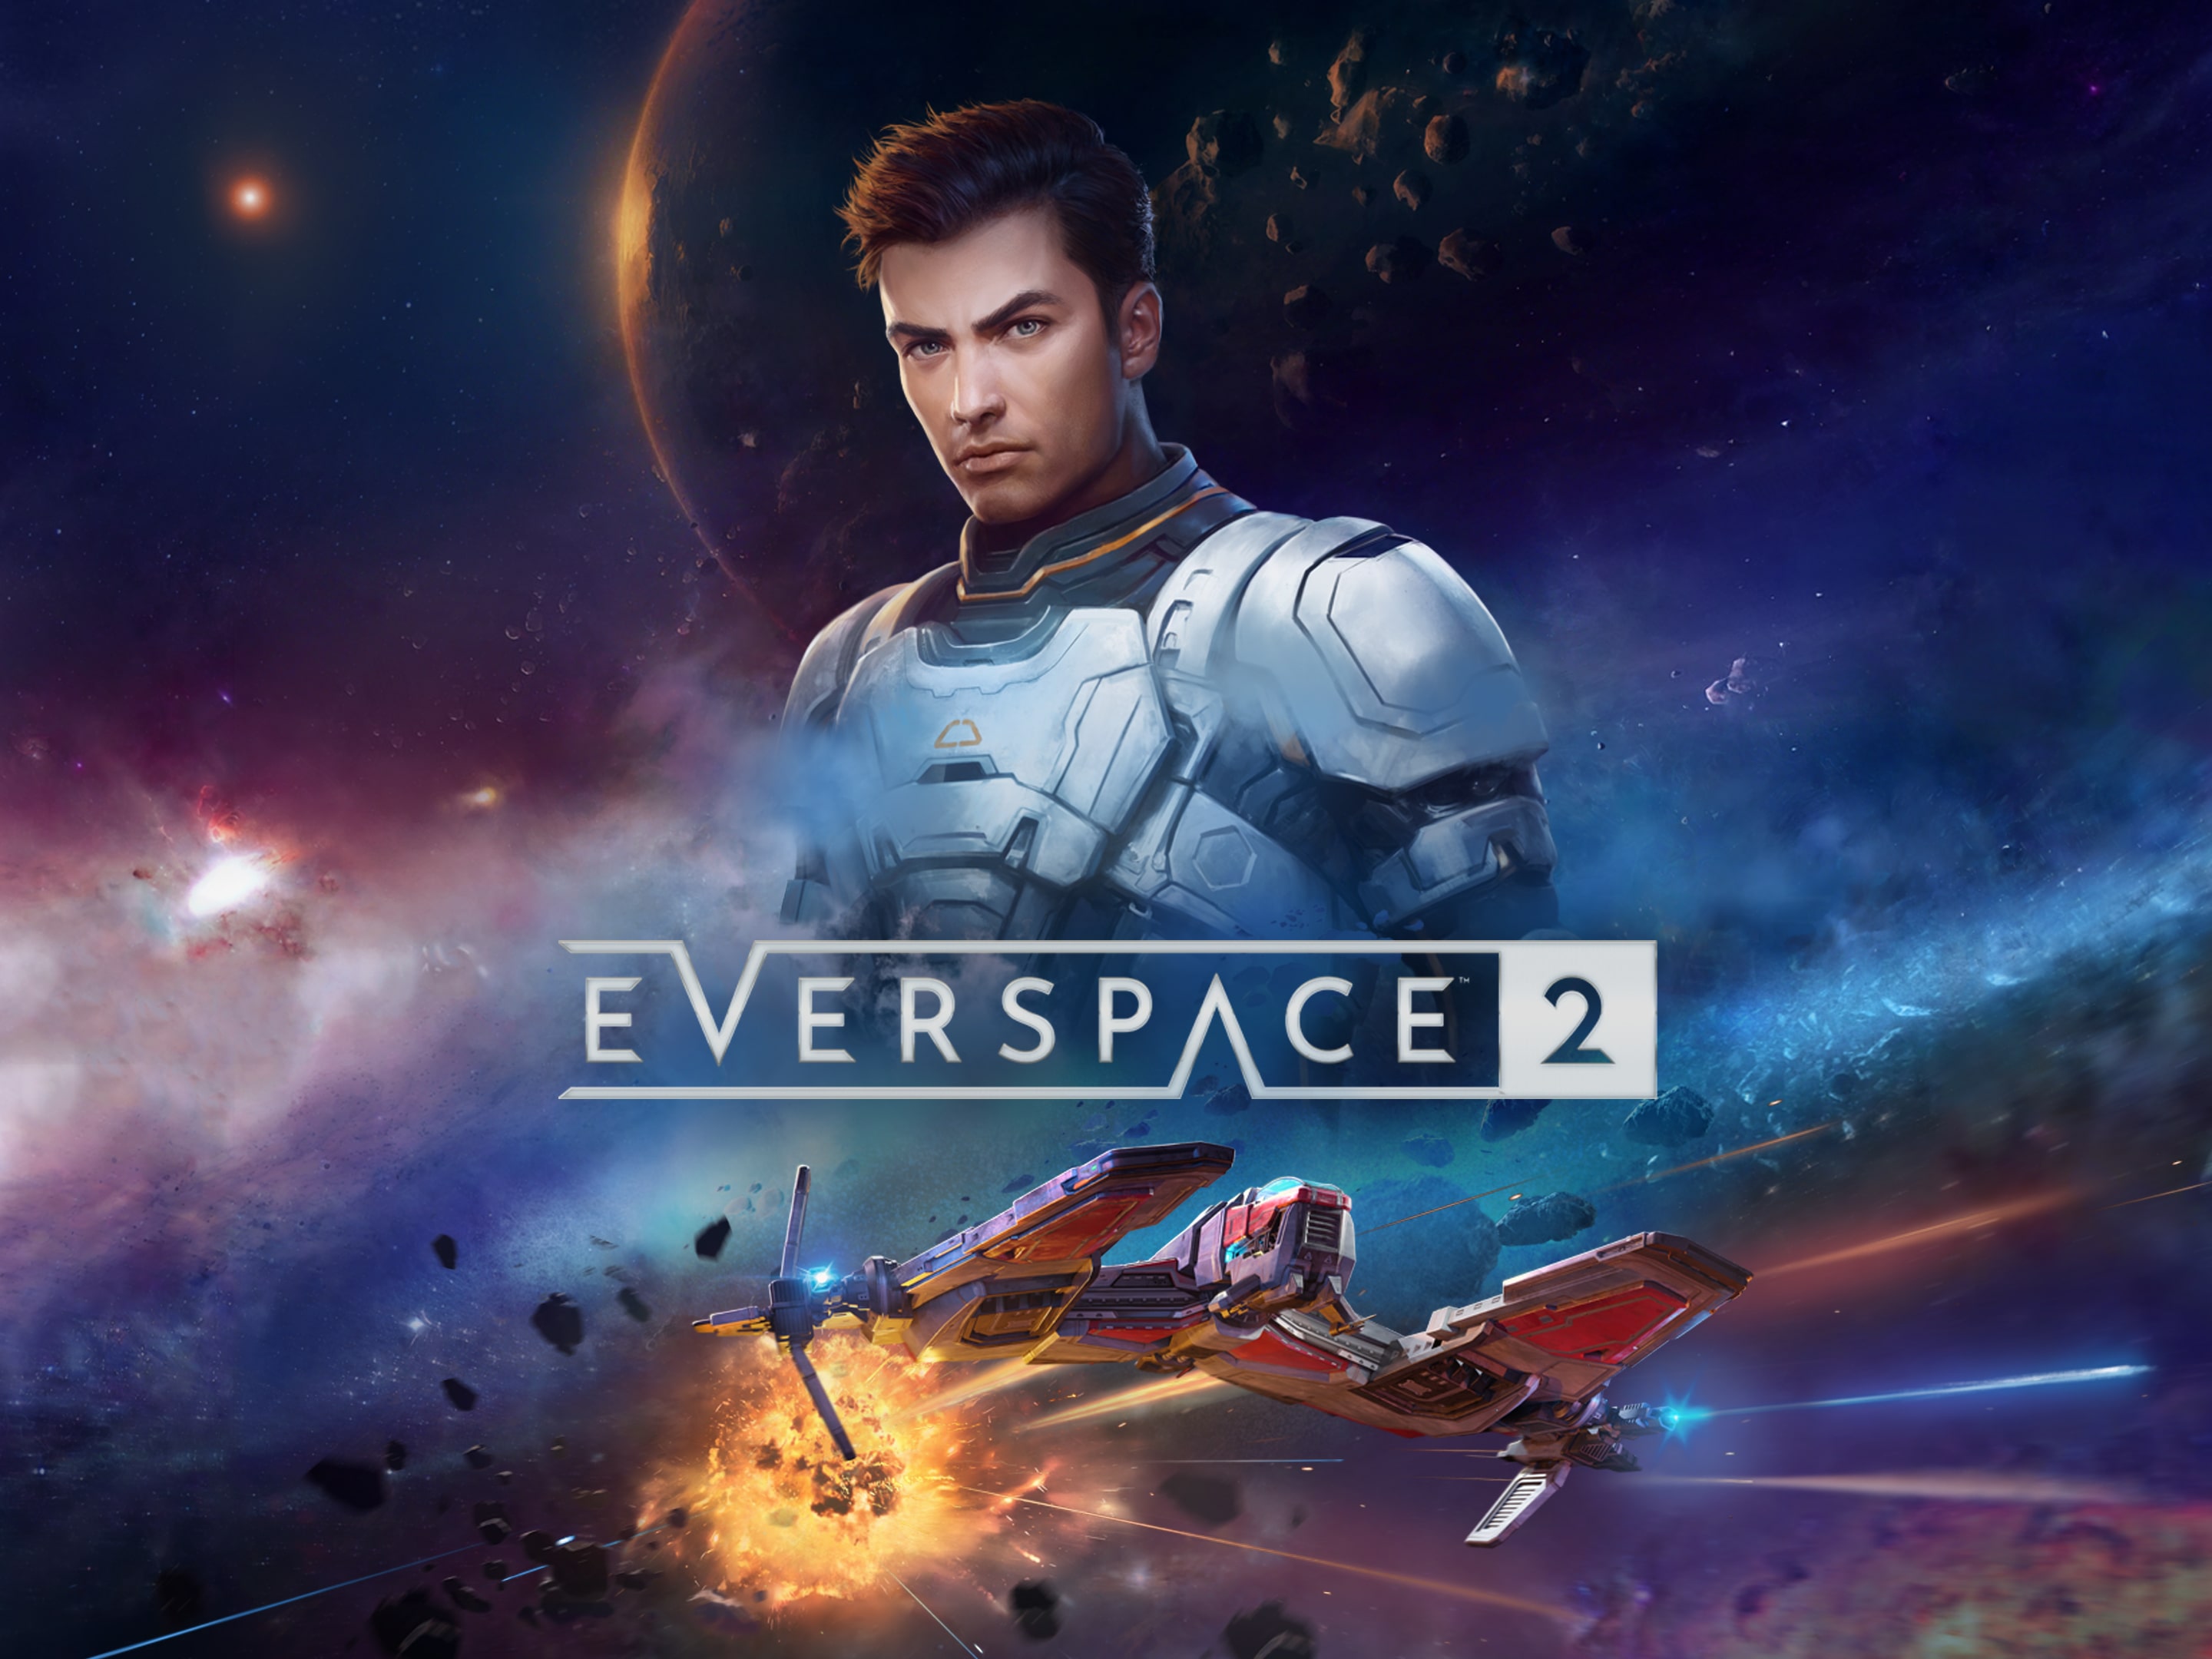 EVERSPACE 2 STELLAR EDITION - PS5